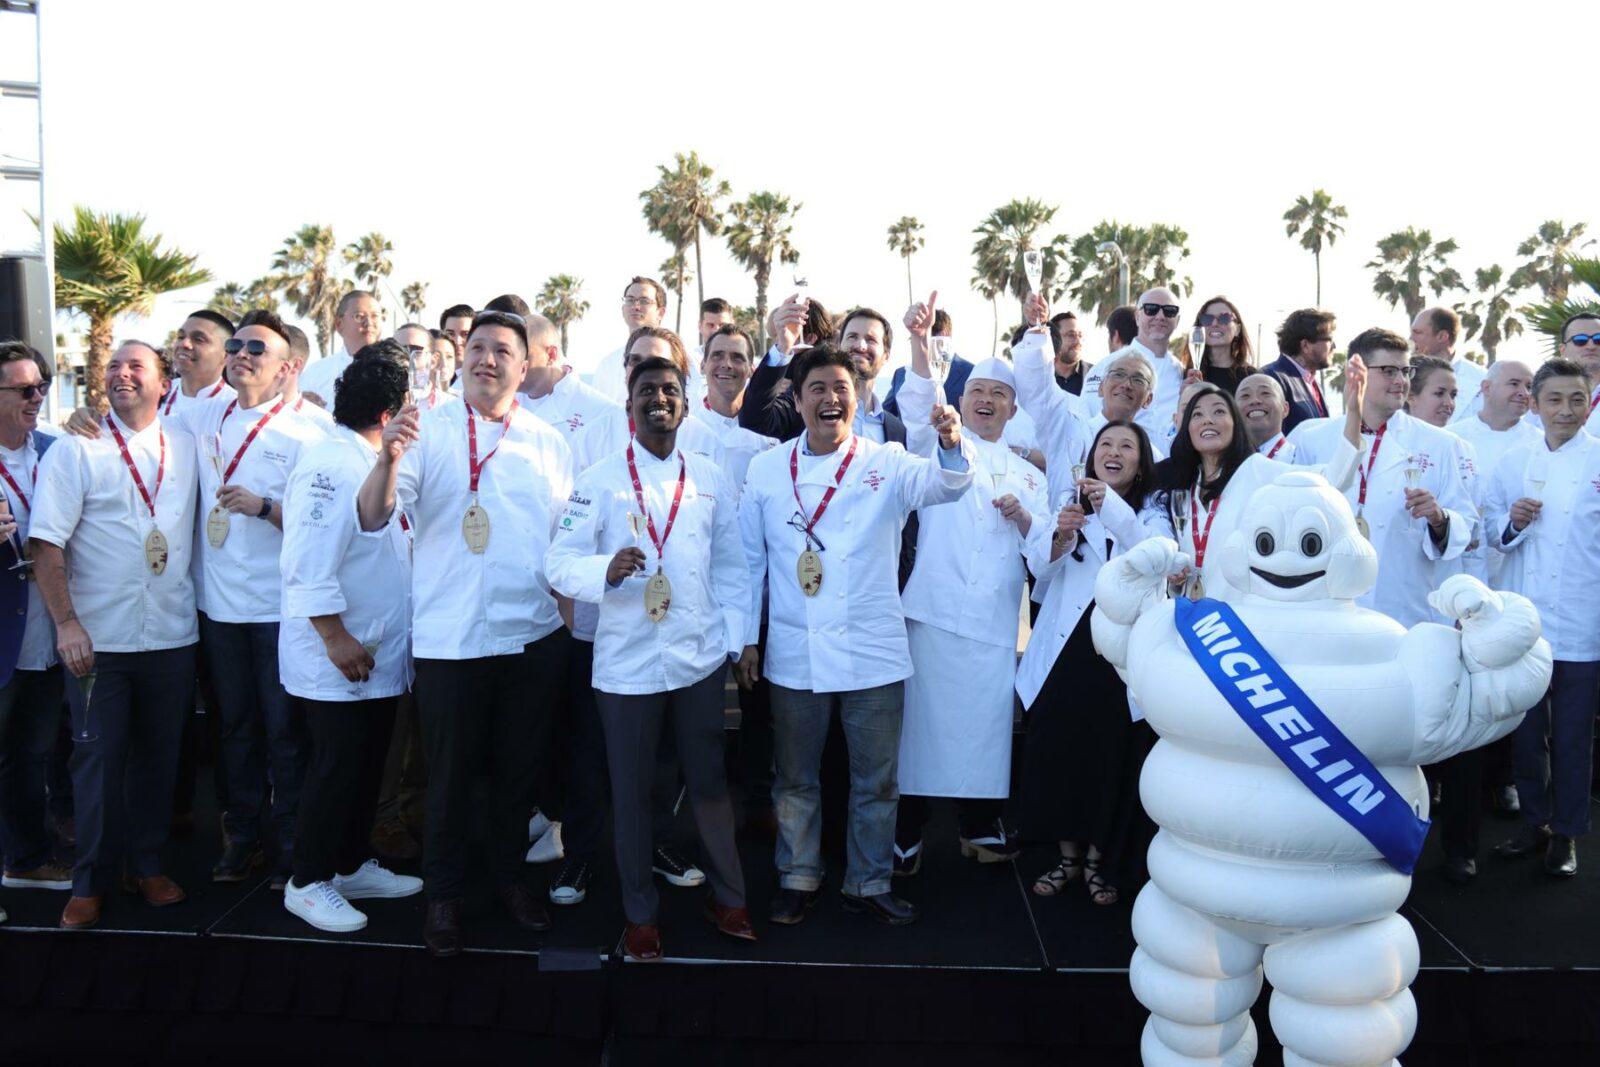 35 Restaurants in California Just Received a Michelin Star